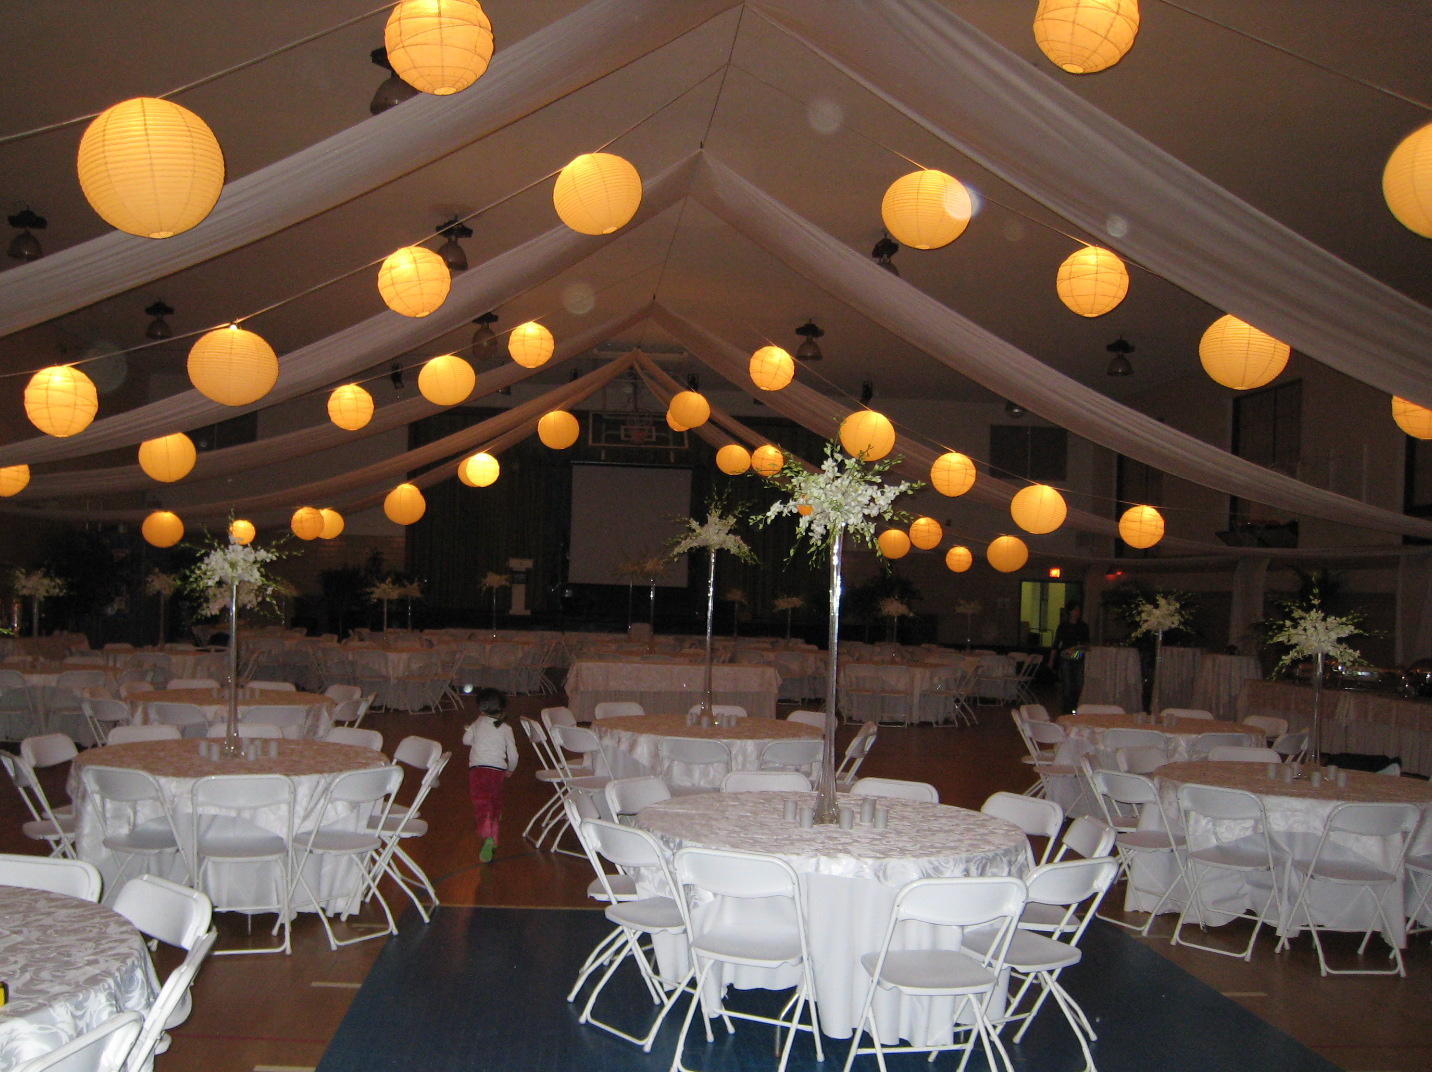 Fabric Swags with Paper Lanterns Indoors